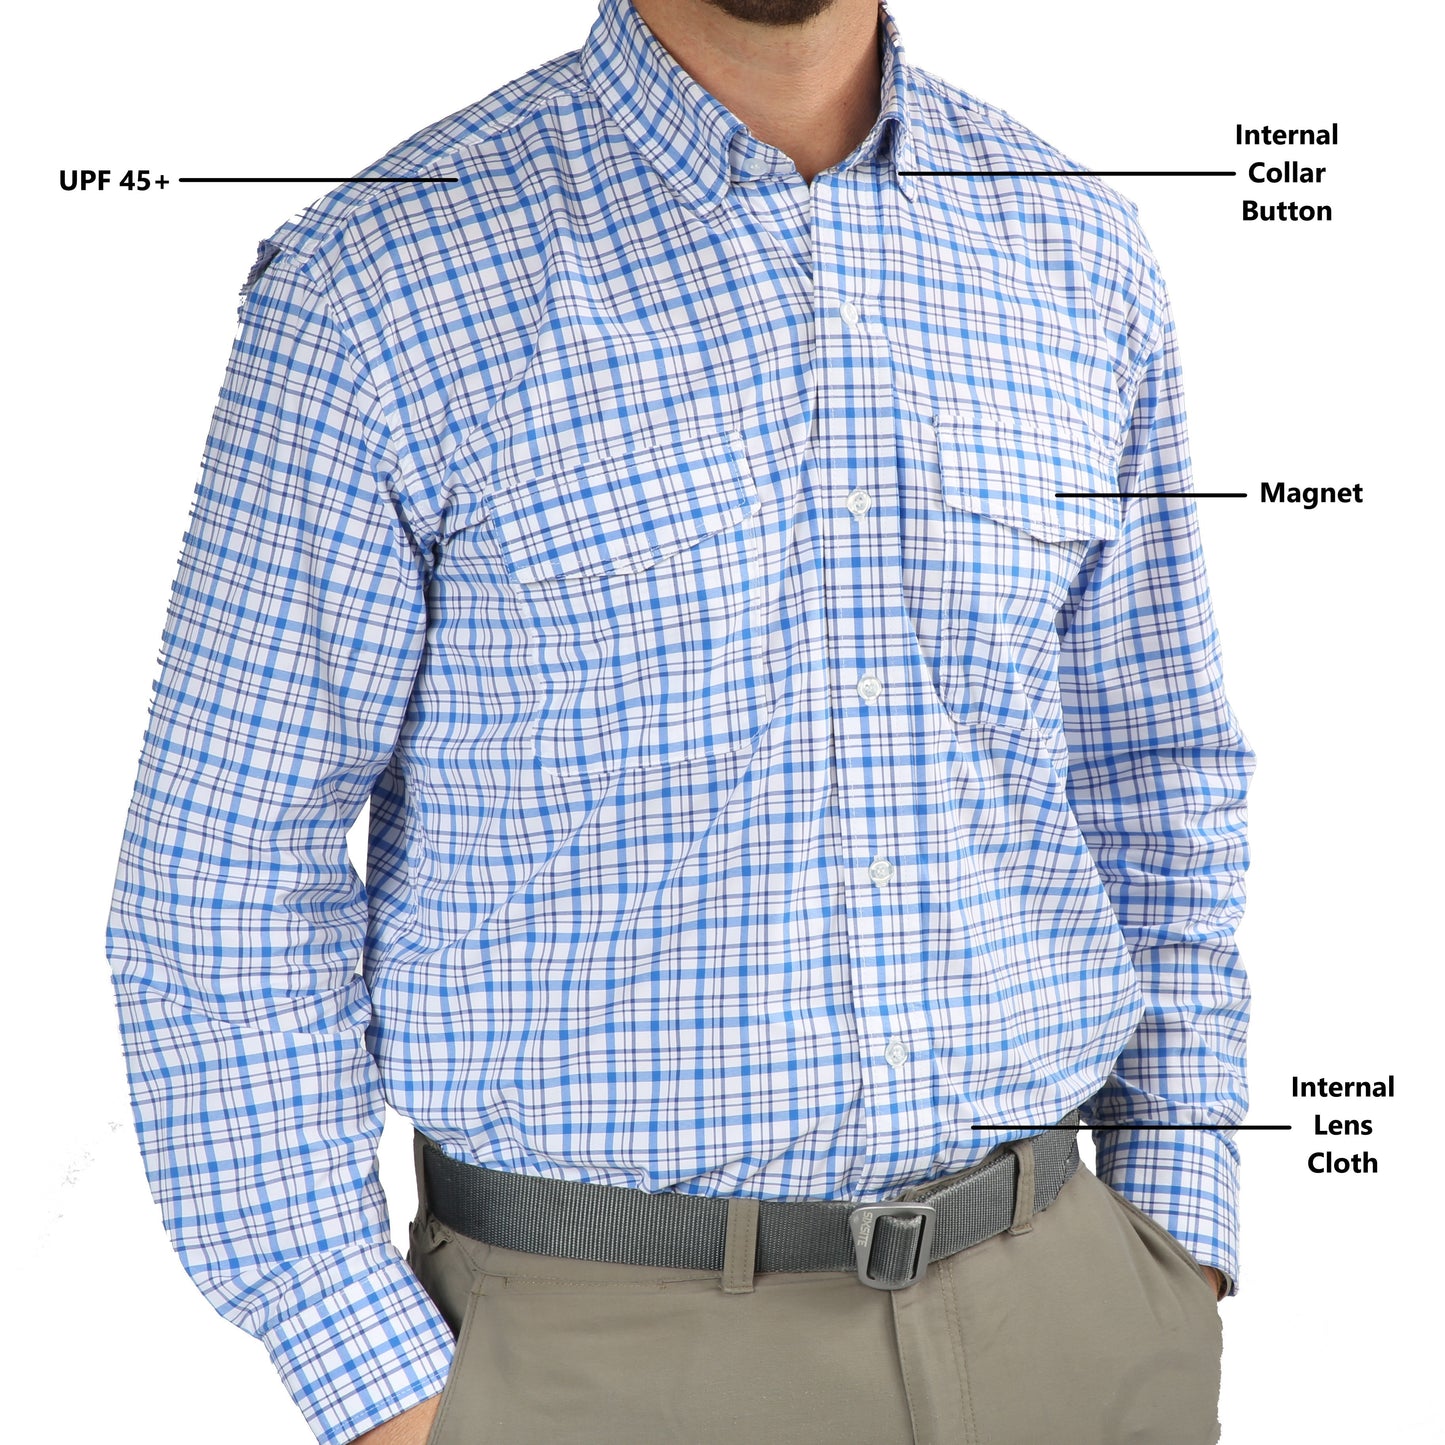 Performance Button Down